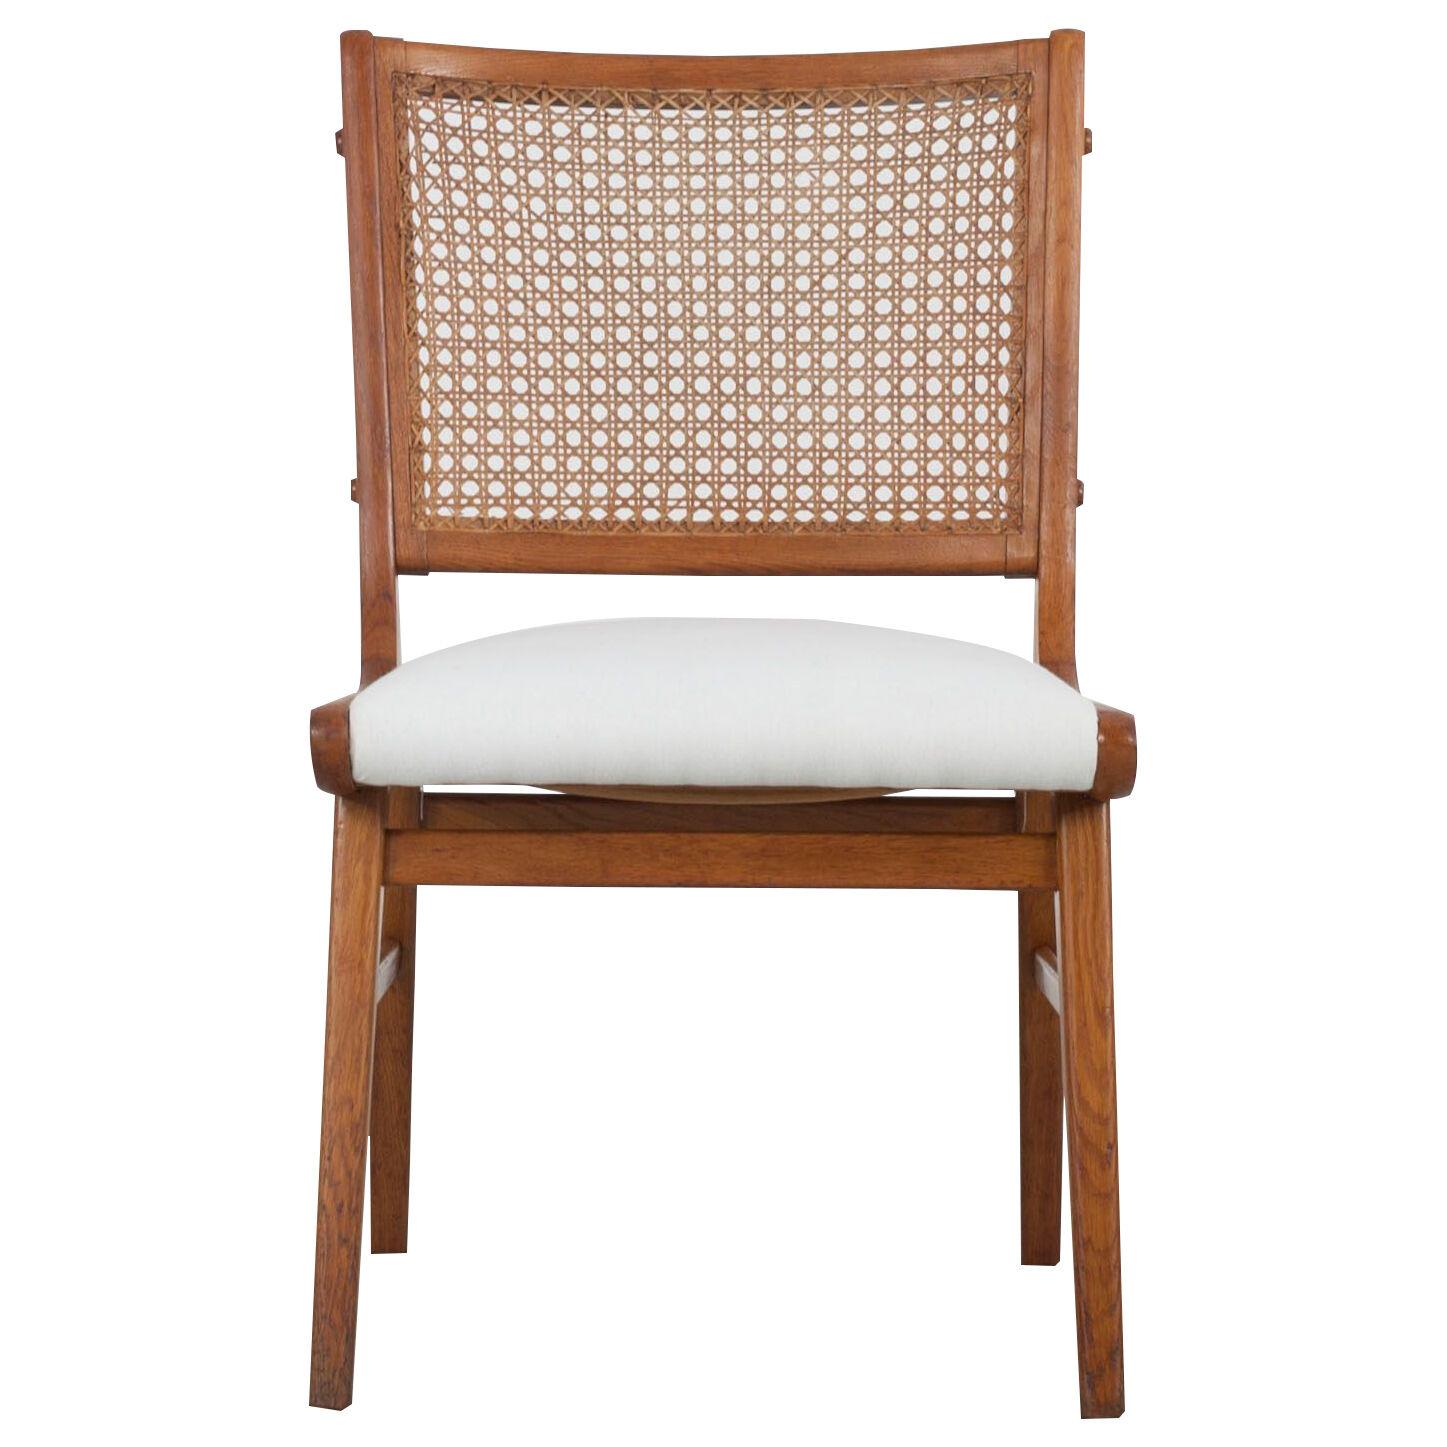 Set of 2 Sidechairs with Viennese Wicker, 1950's